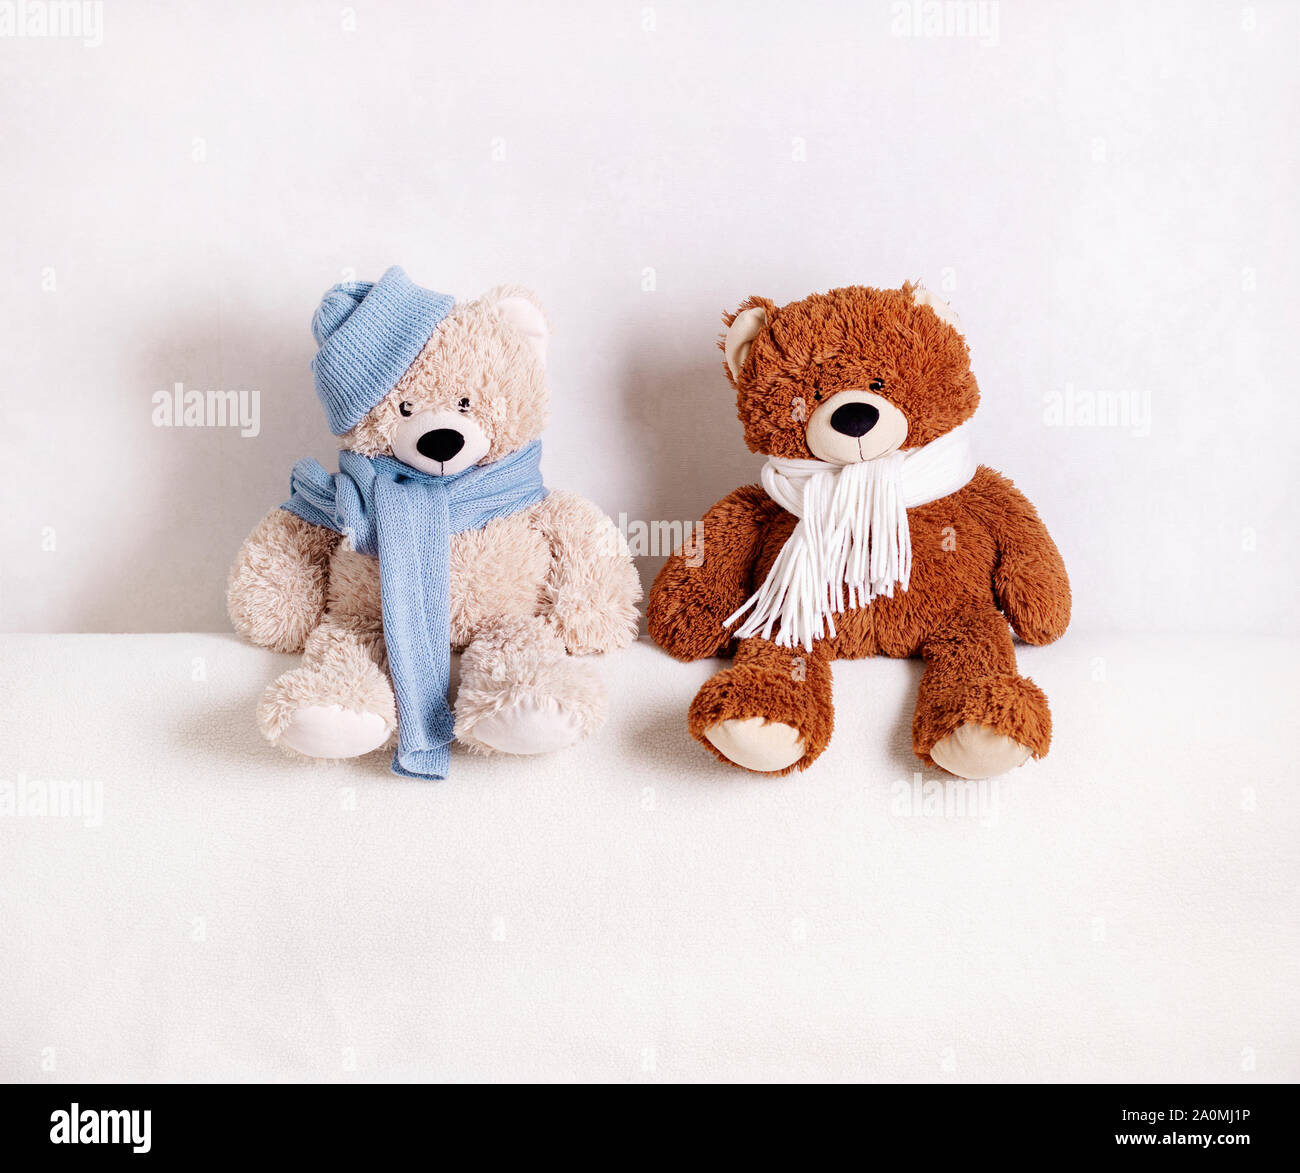 Children's toys teddy bears sitting on a white sofa in a knitted white and blue scarf and hat. Selective focus. Stock Photo